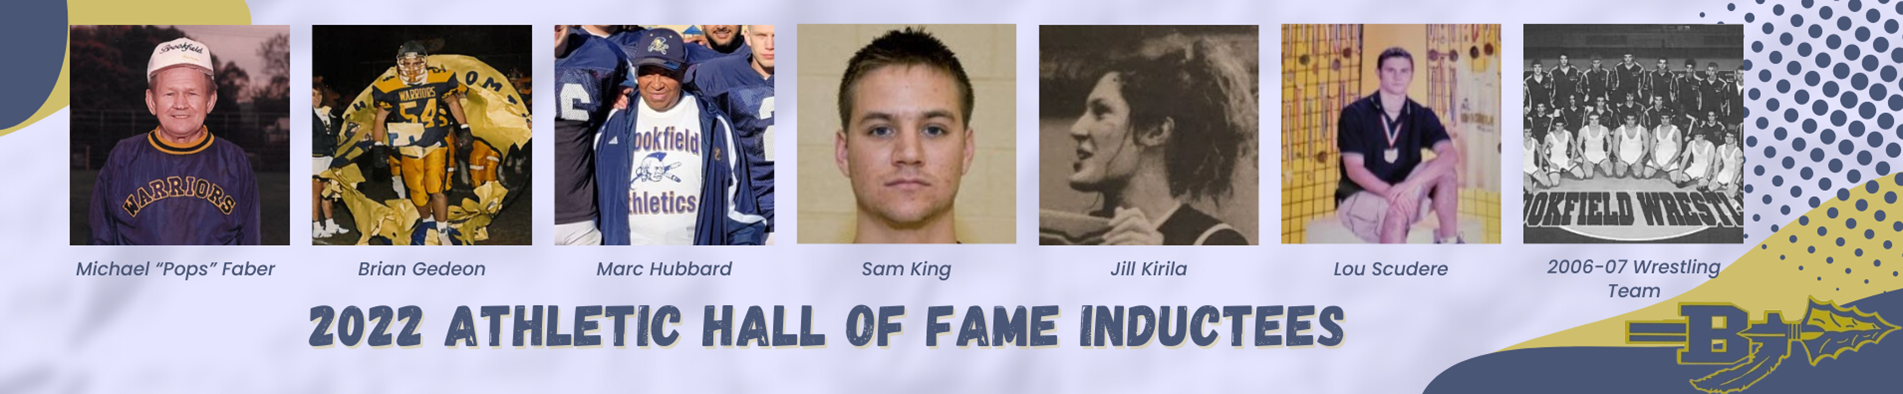 2022 Athletic Hall of Fame Inductees